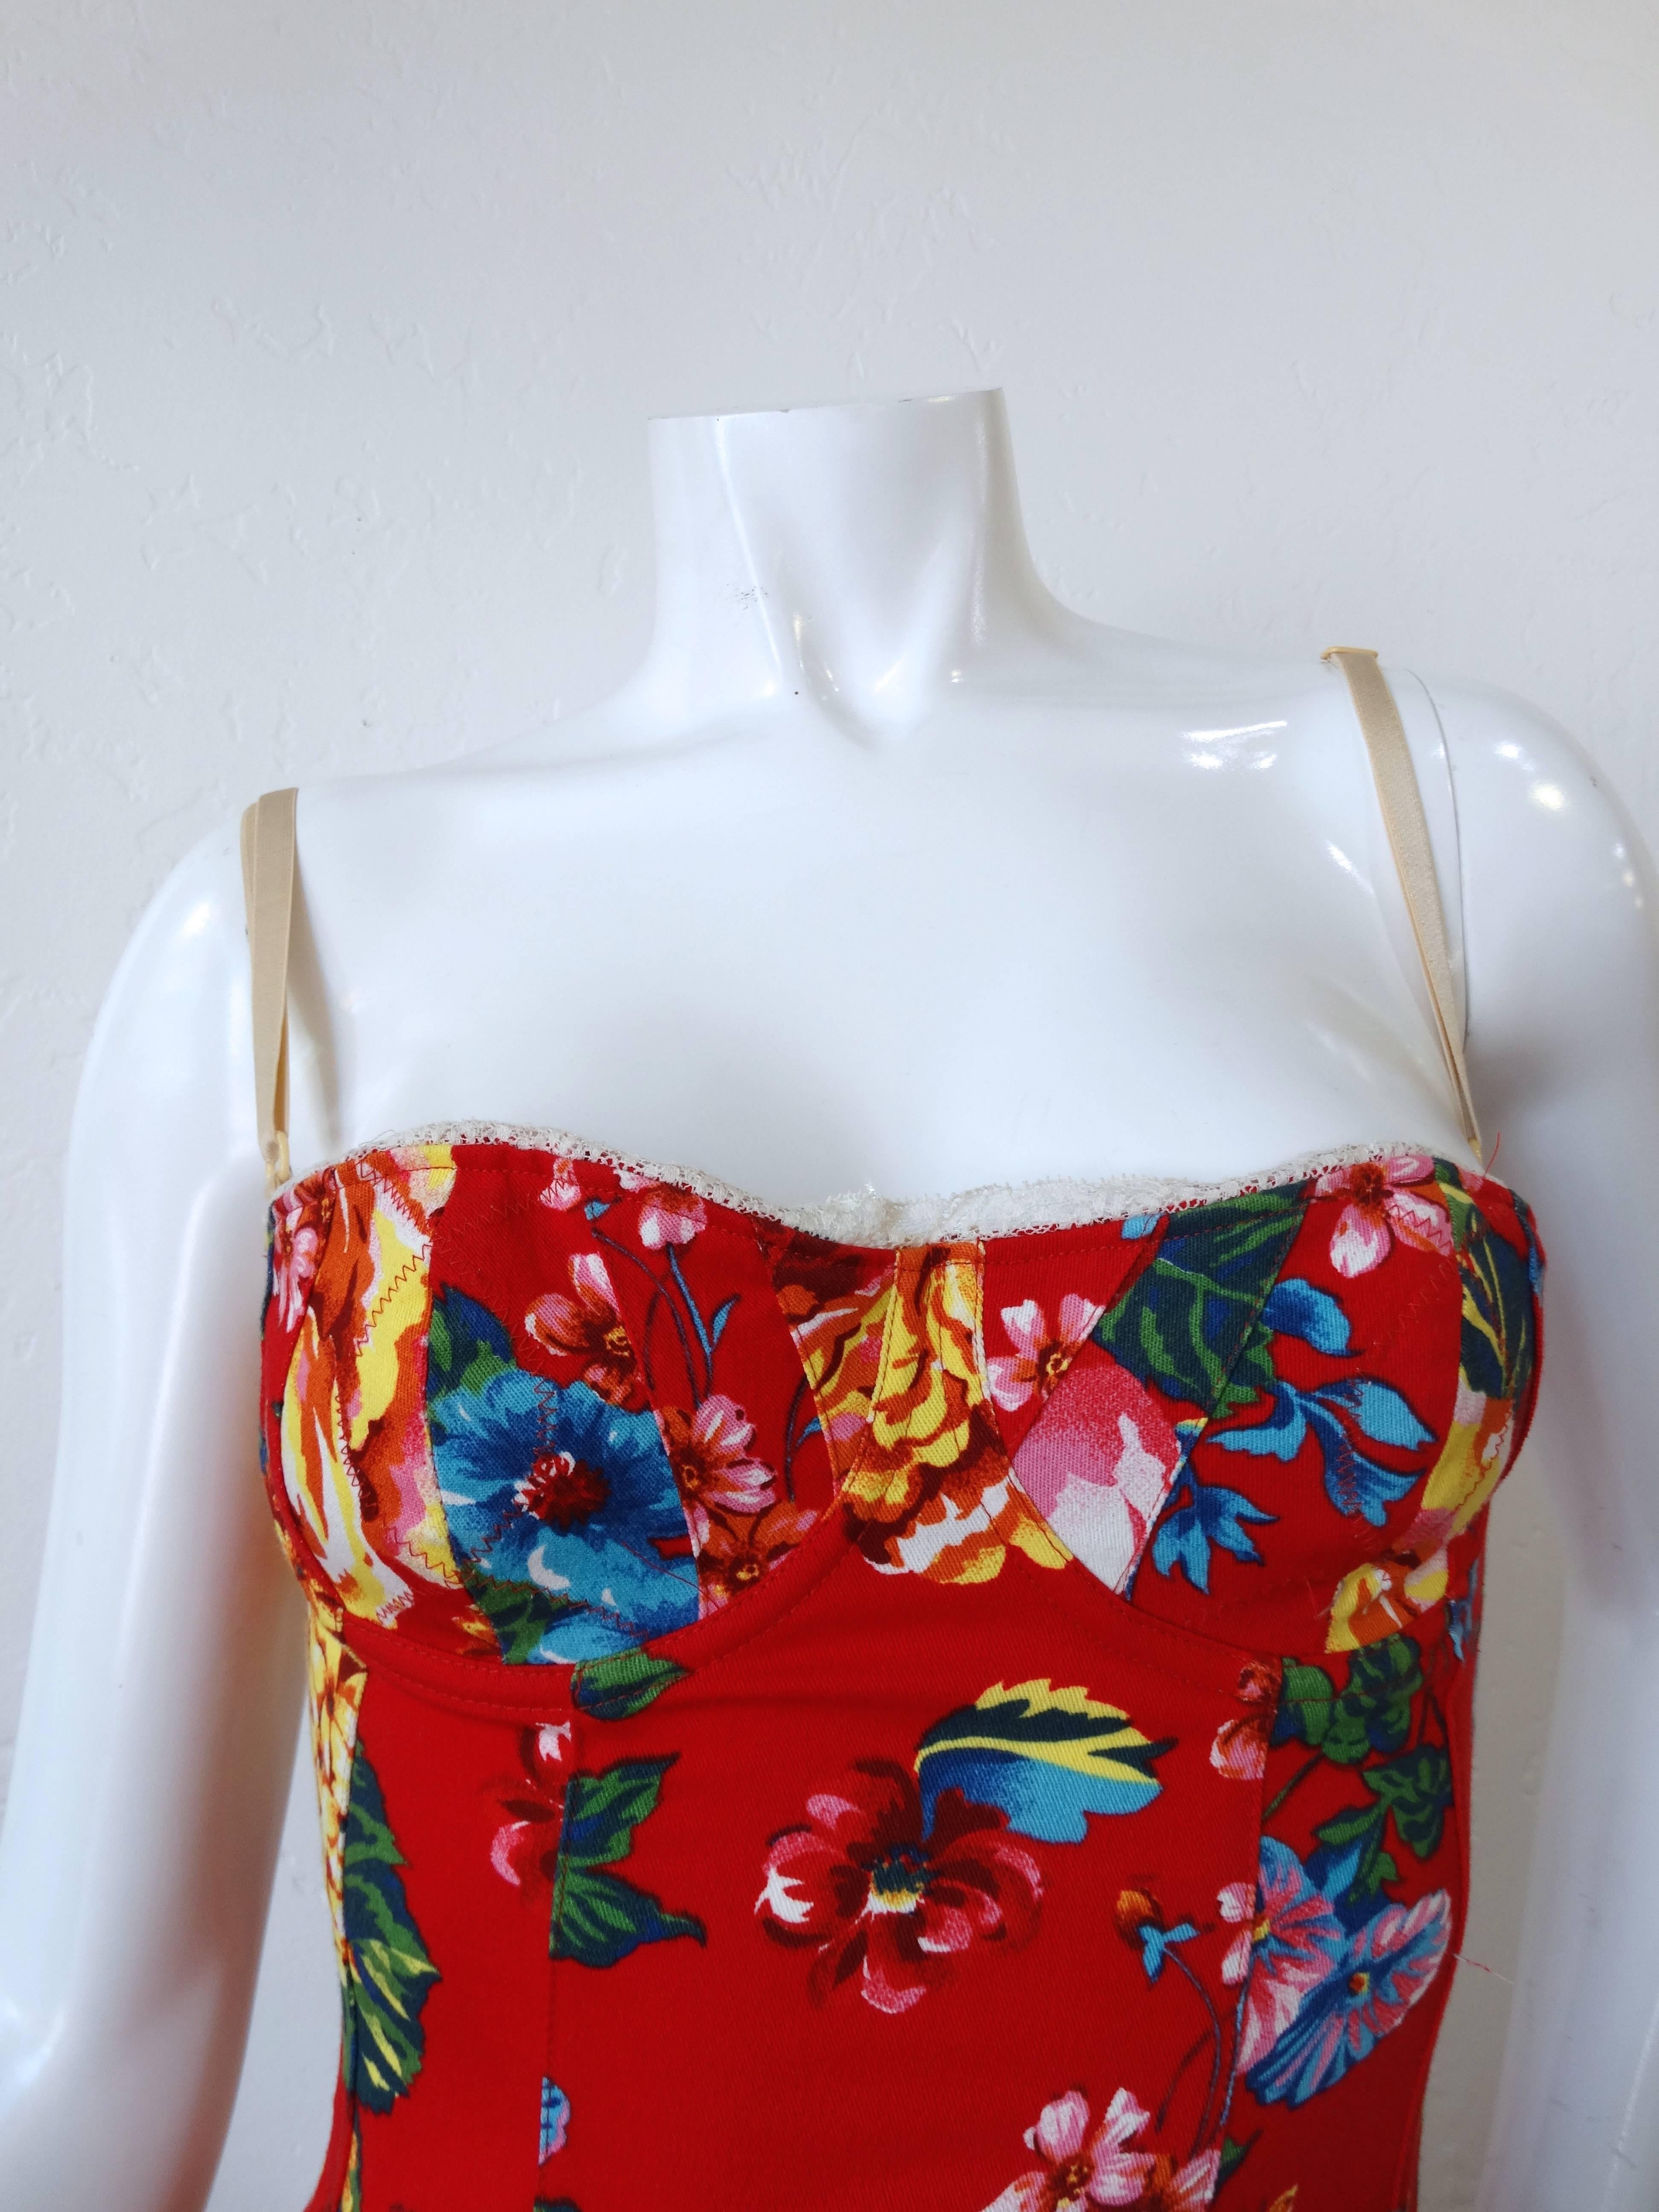 90's Dolce and Gabbana Corset Bodycon Dress. Bold graphic cabbage rose floral print. Non functional hook and eye details down the back add to the corset look. Cream lace trim along the bustline. Adjustable straps. Zips up the side. Marked a size 44.